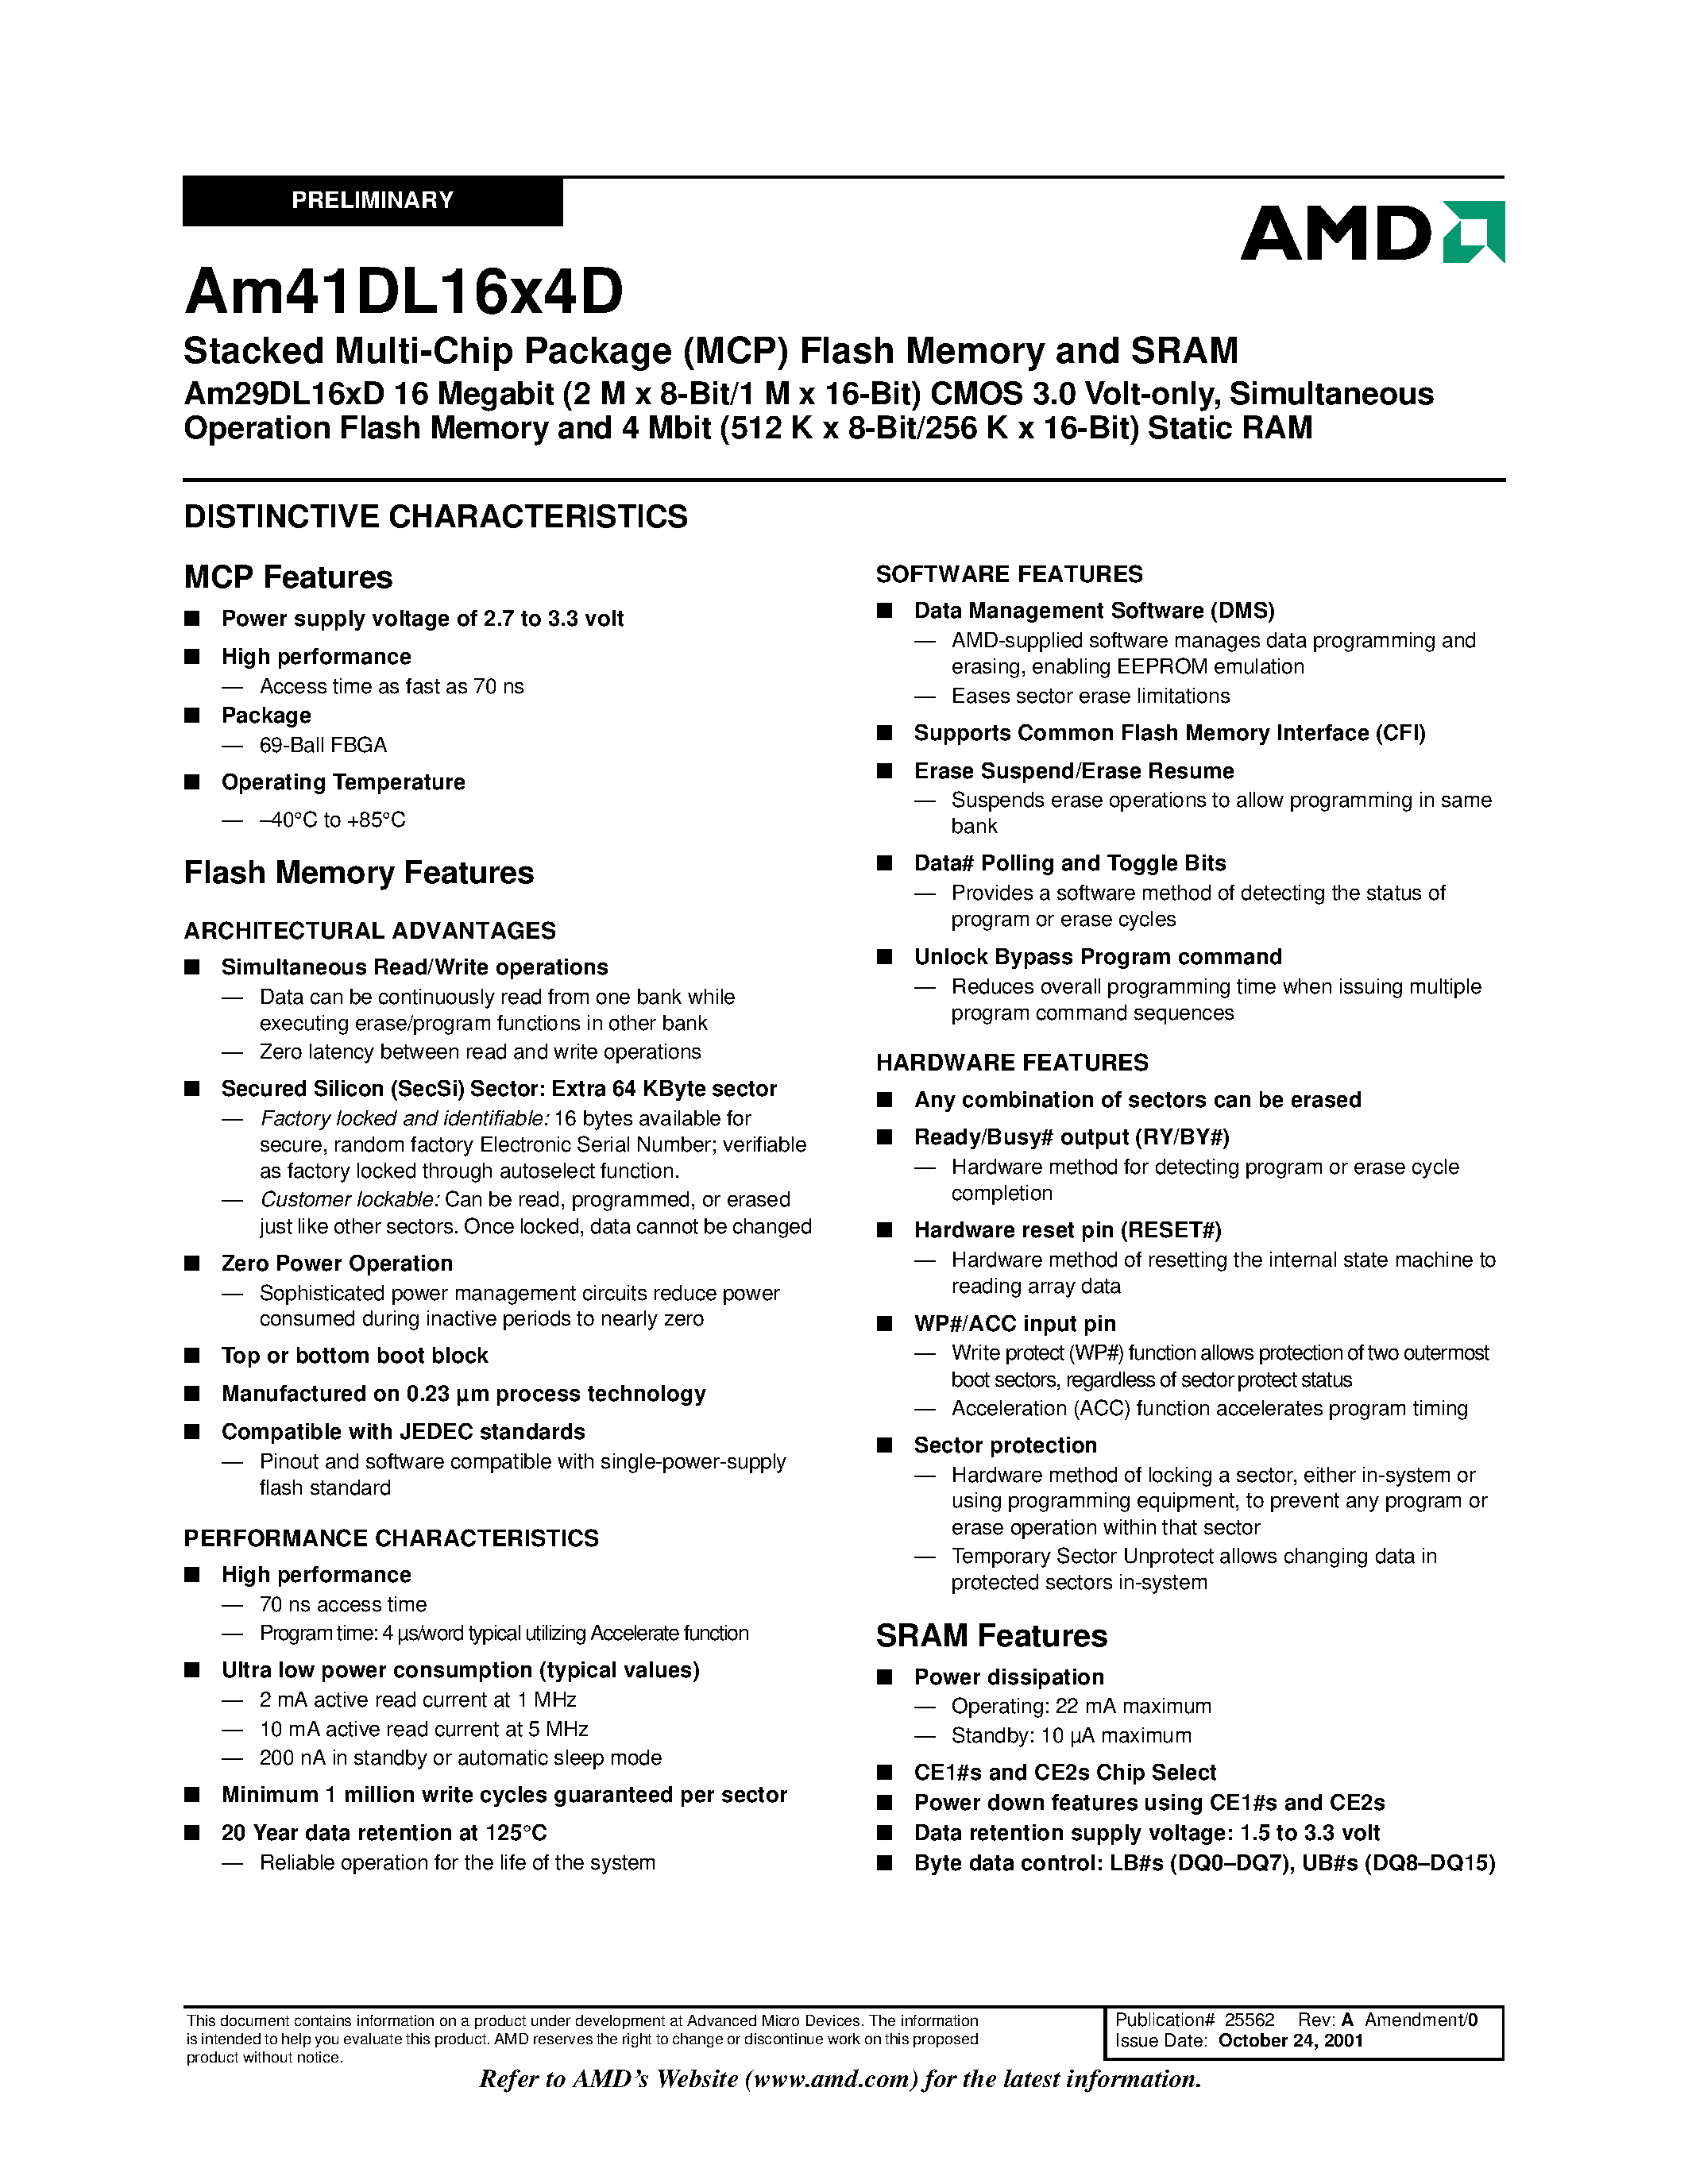 Datasheet AM41DL16X4D - Simultaneous Operation Flash Memory page 2